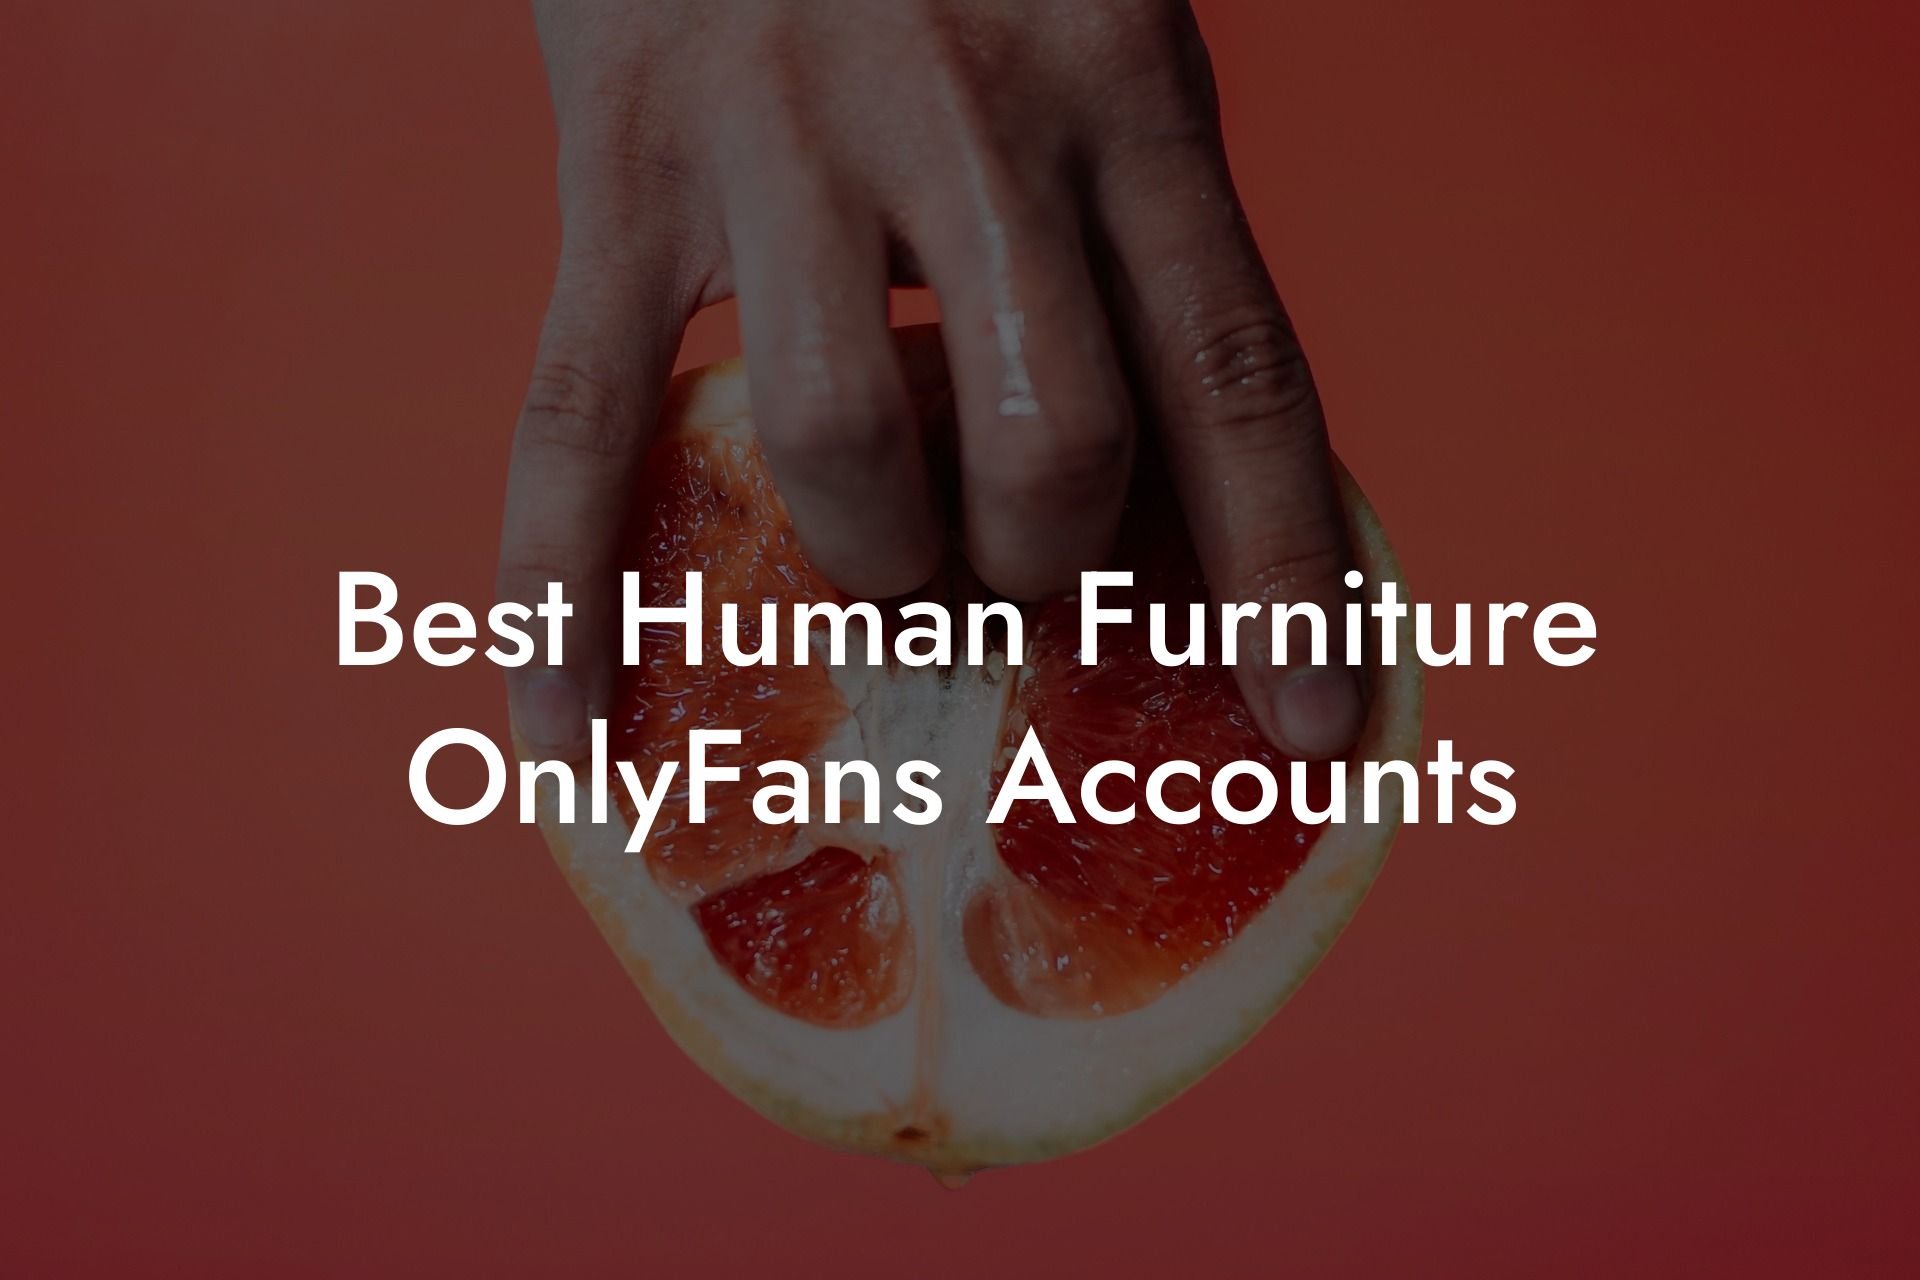 Best Human Furniture OnlyFans Accounts